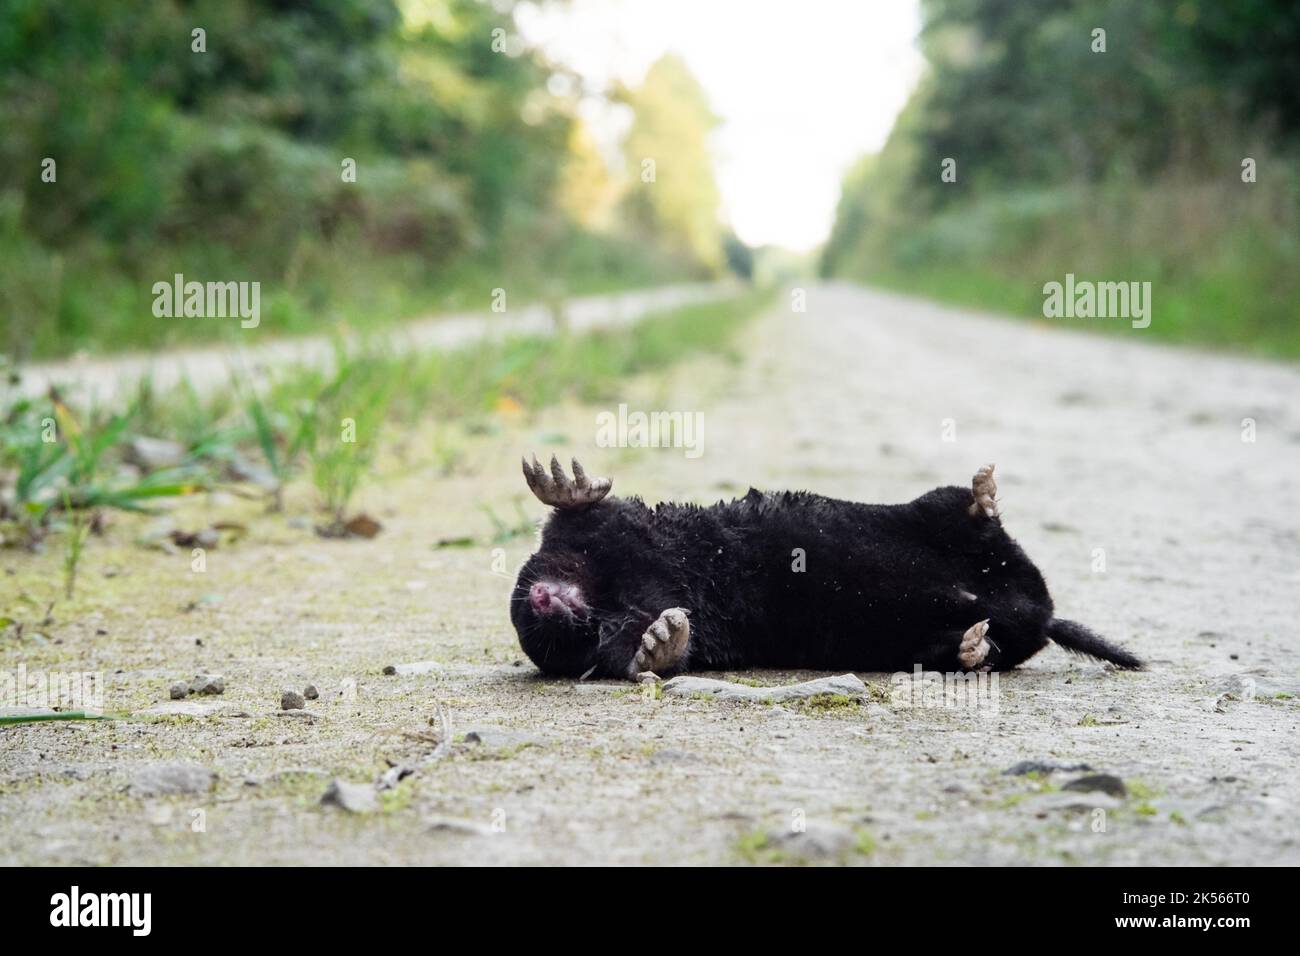 Dead black mole on a forest road Stock Photo